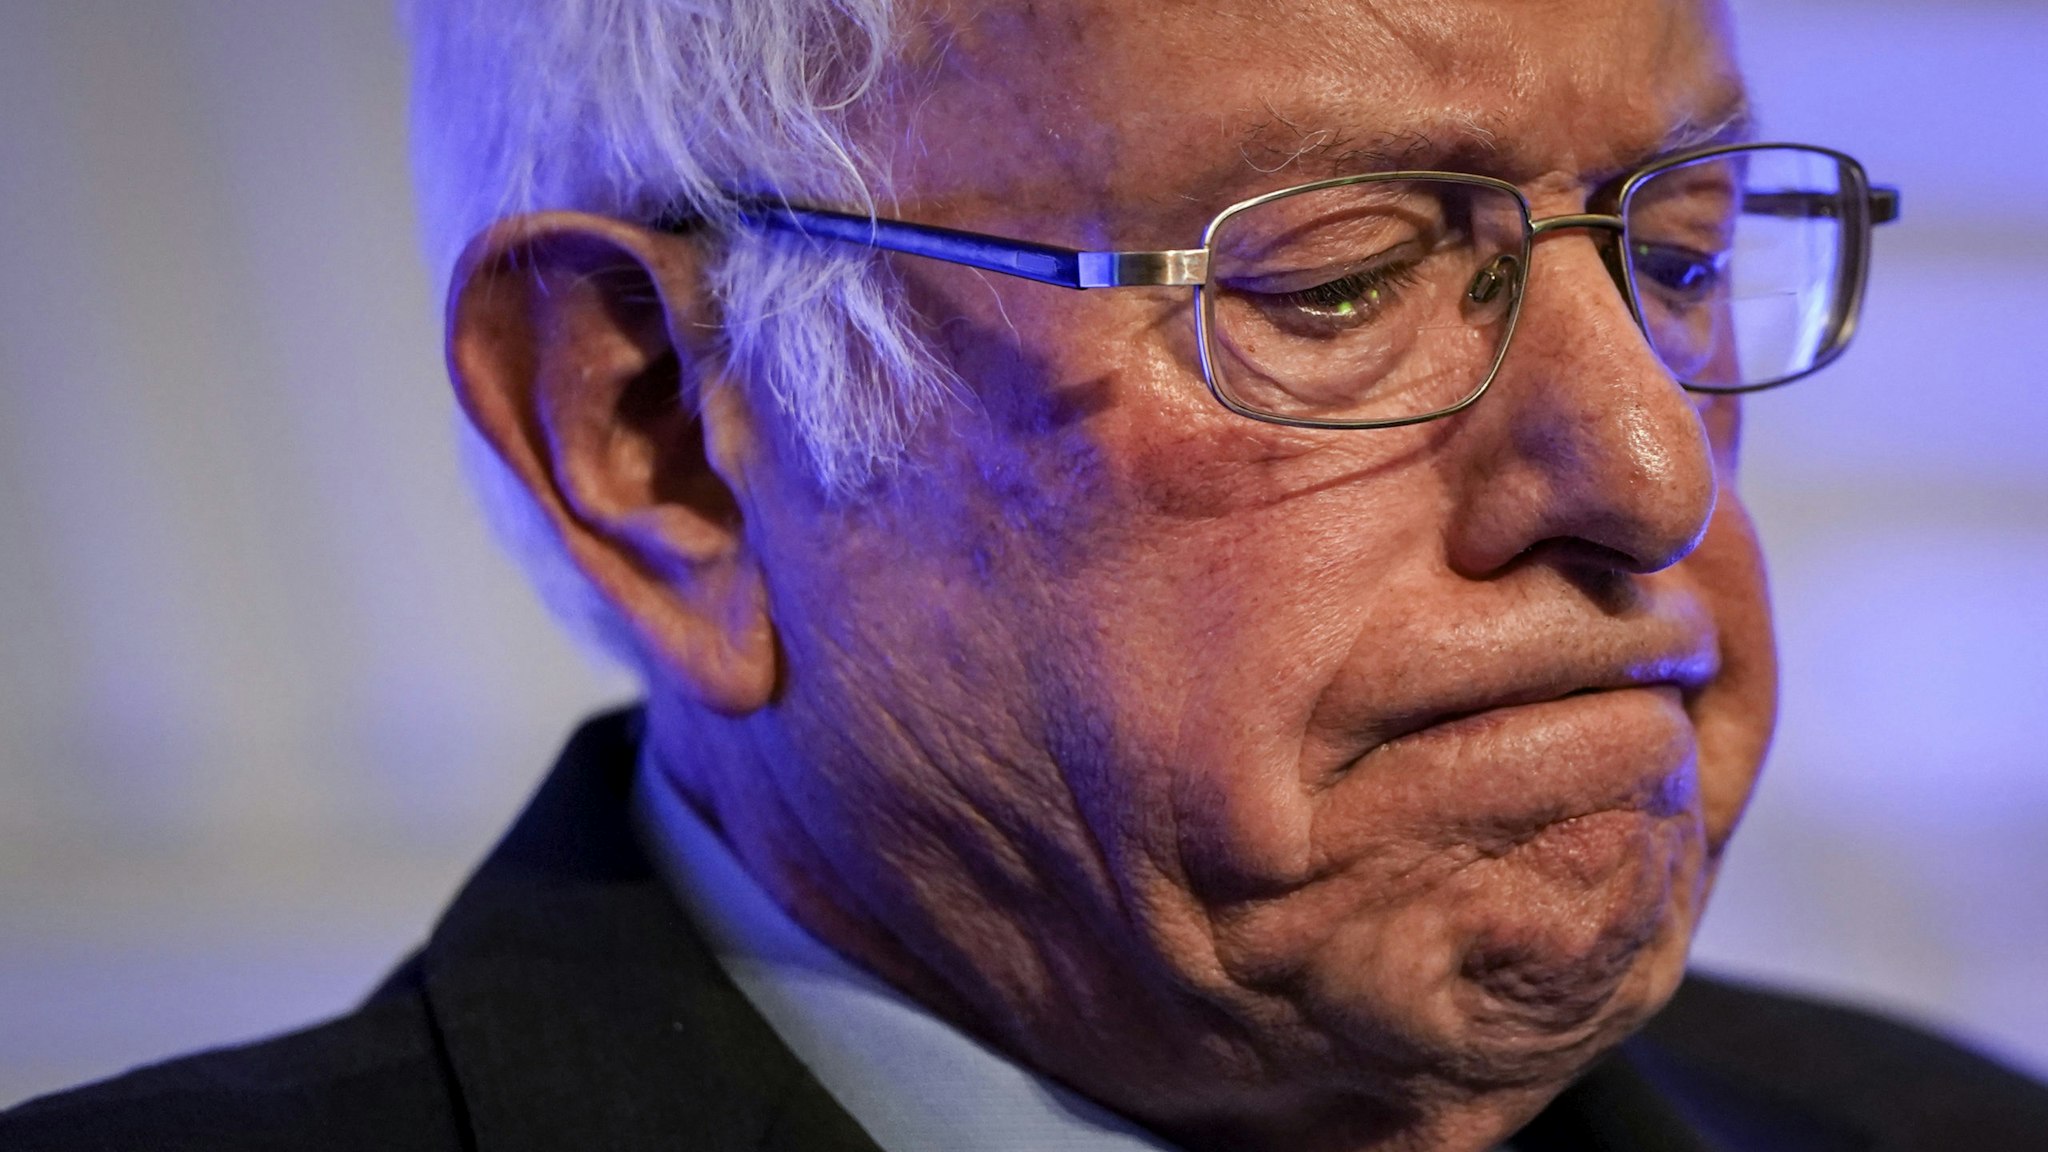 CHARLESTON, SC - FEBRUARY 24: Democratic presidential candidate Sen. Bernie Sanders (I-VT) pauses while speaking at the South Carolina Democratic Party "First in the South" dinner on February 24, 2020 in Charleston, South Carolina. South Carolina holds its Democratic presidential primary on Saturday, February 29.